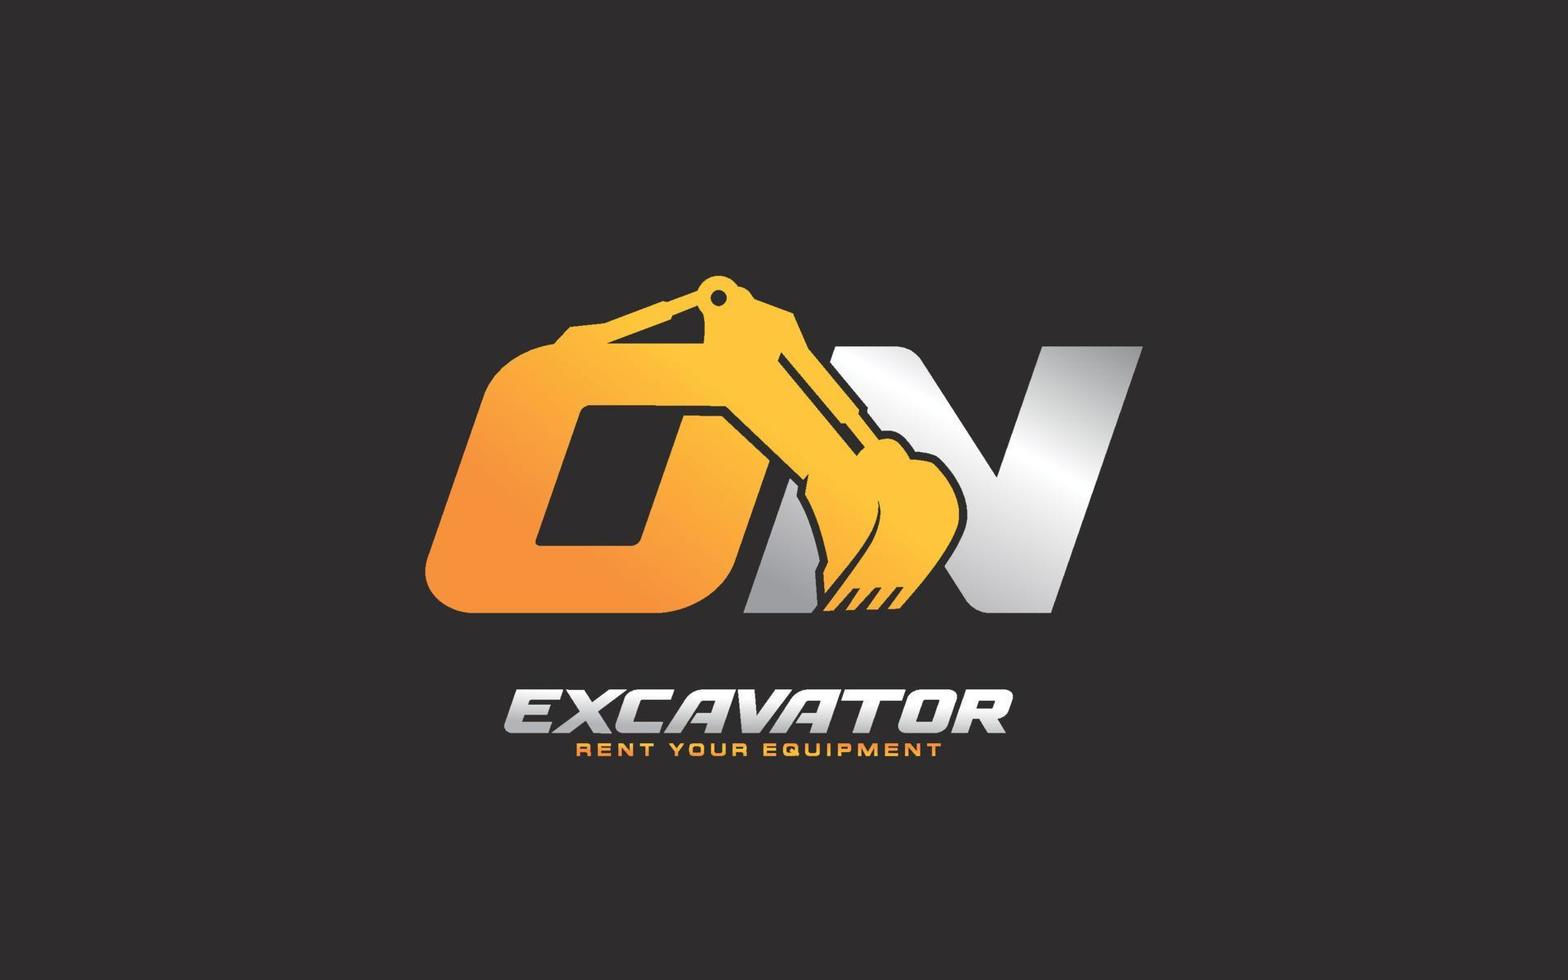 ON logo excavator for construction company. Heavy equipment template vector illustration for your brand.